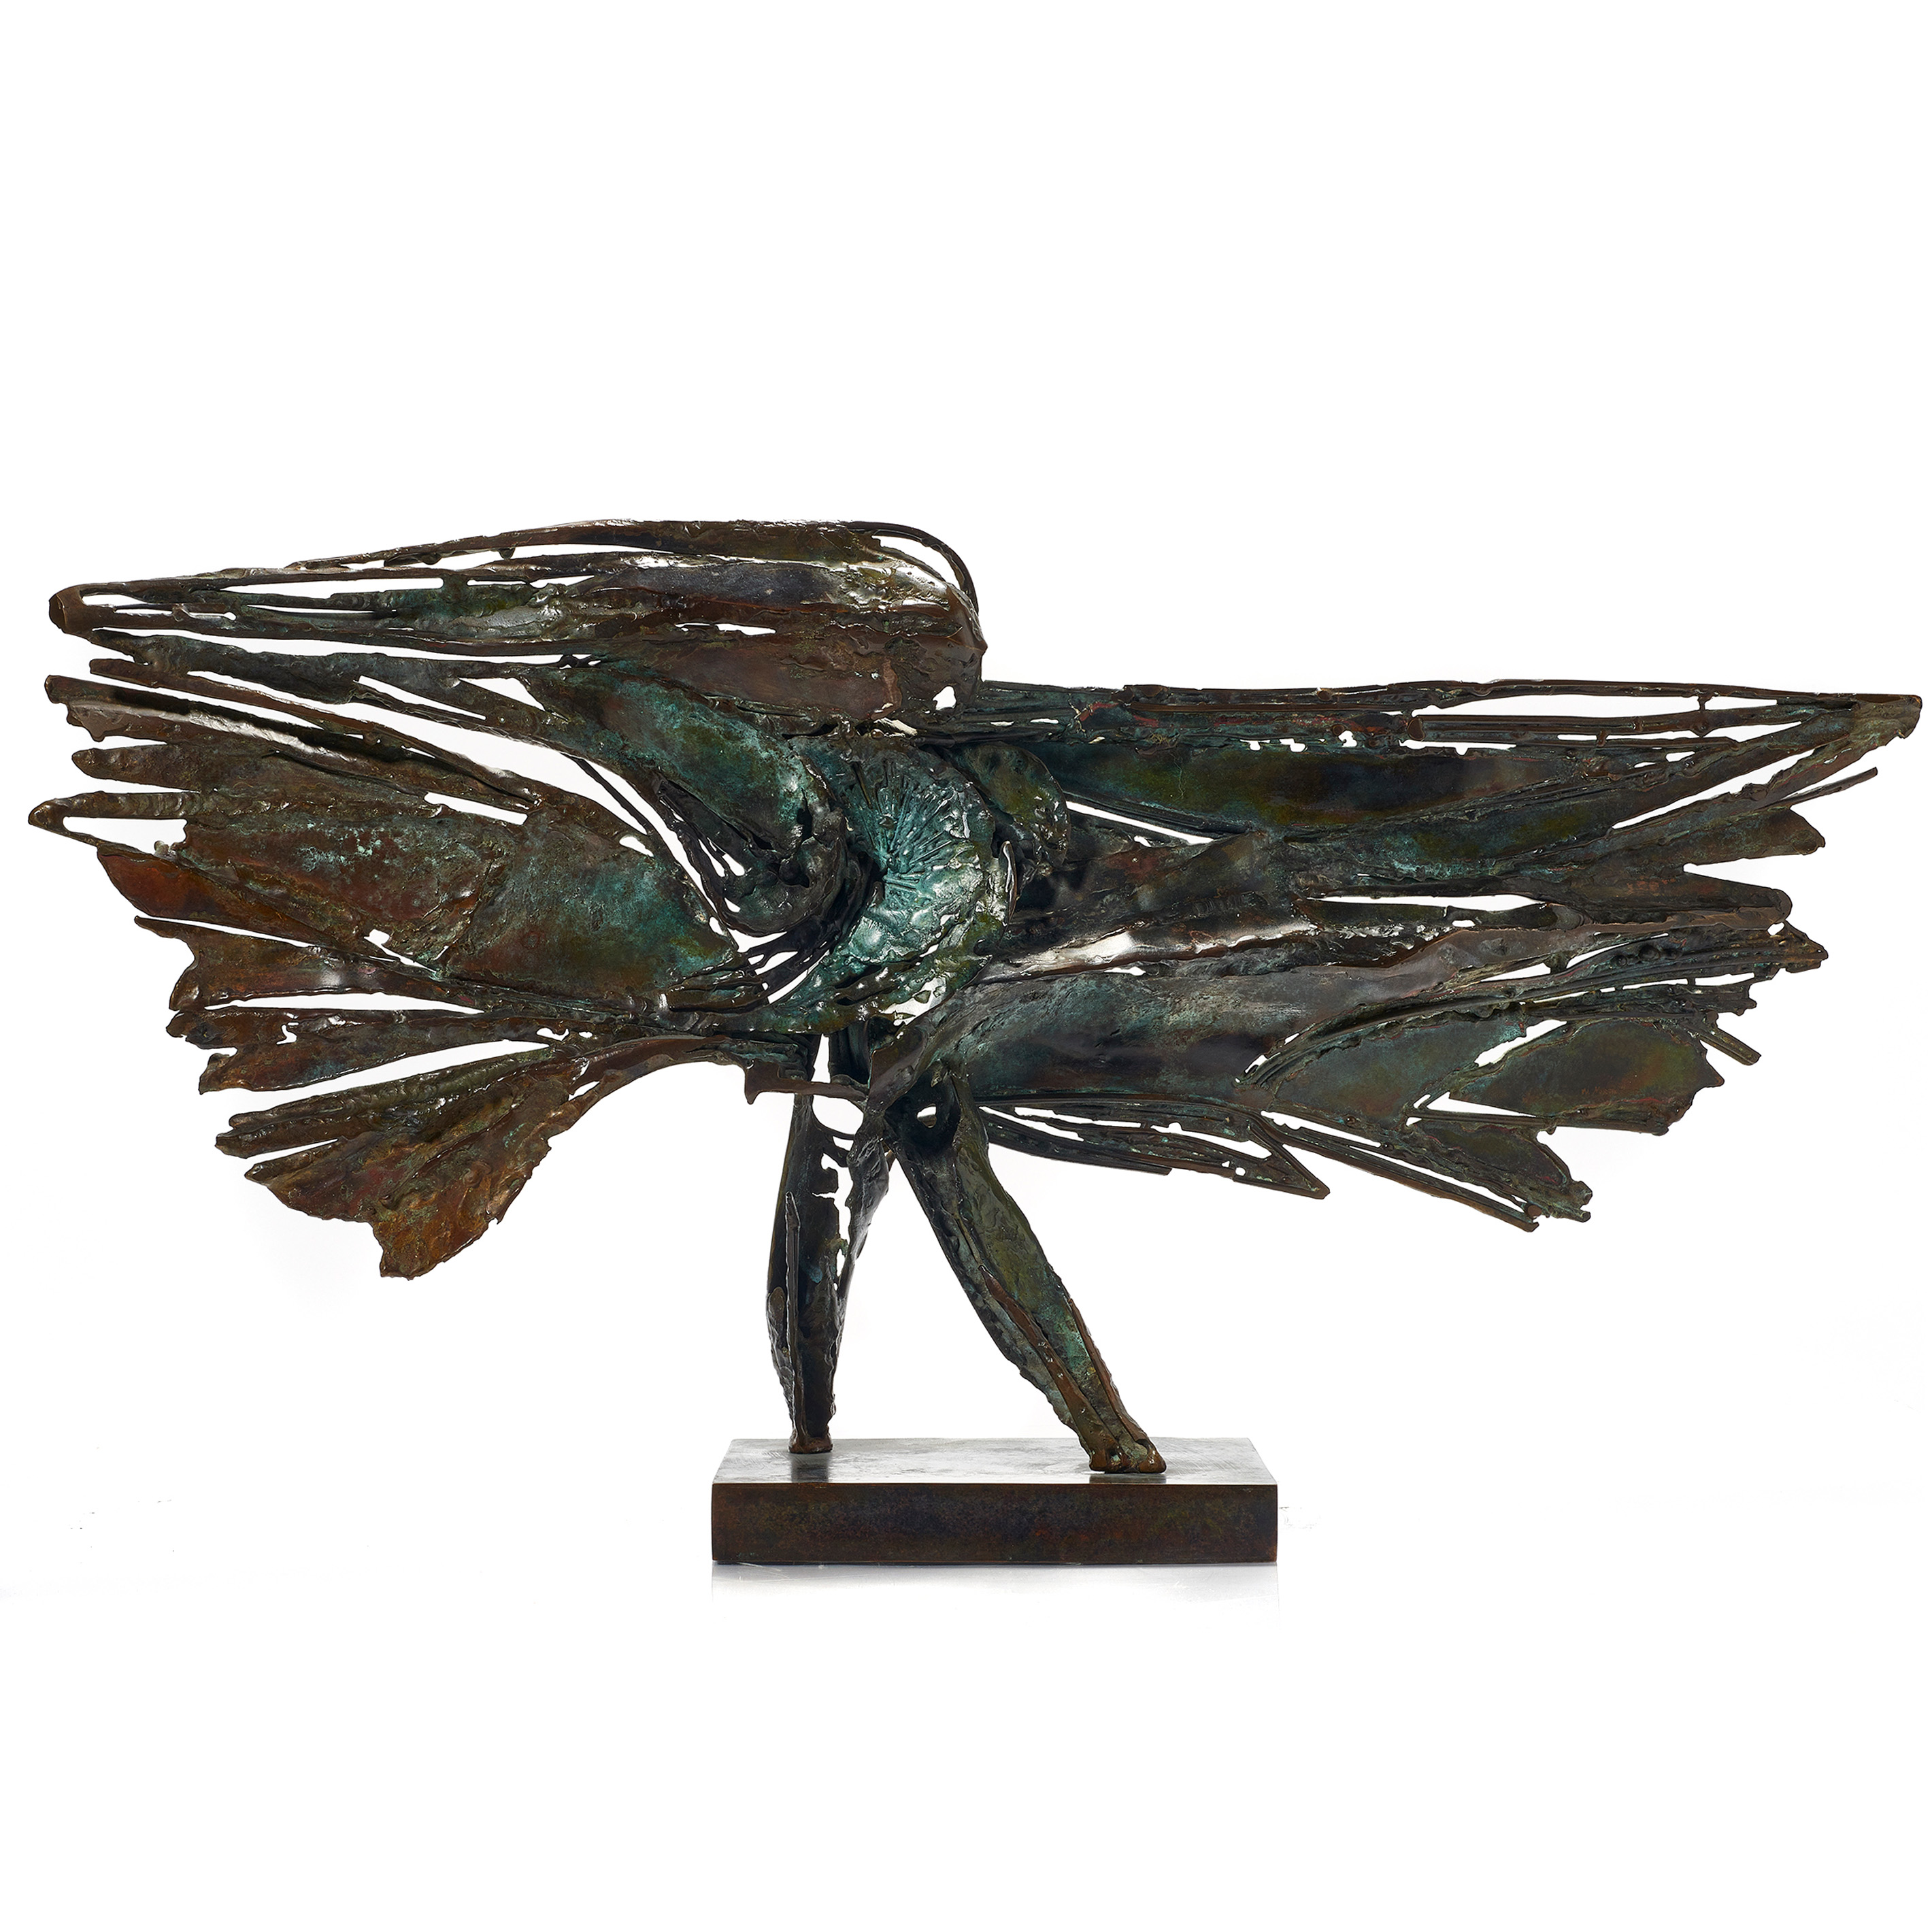 SCULPTURE, ABSTRACT WINGED FIGURE